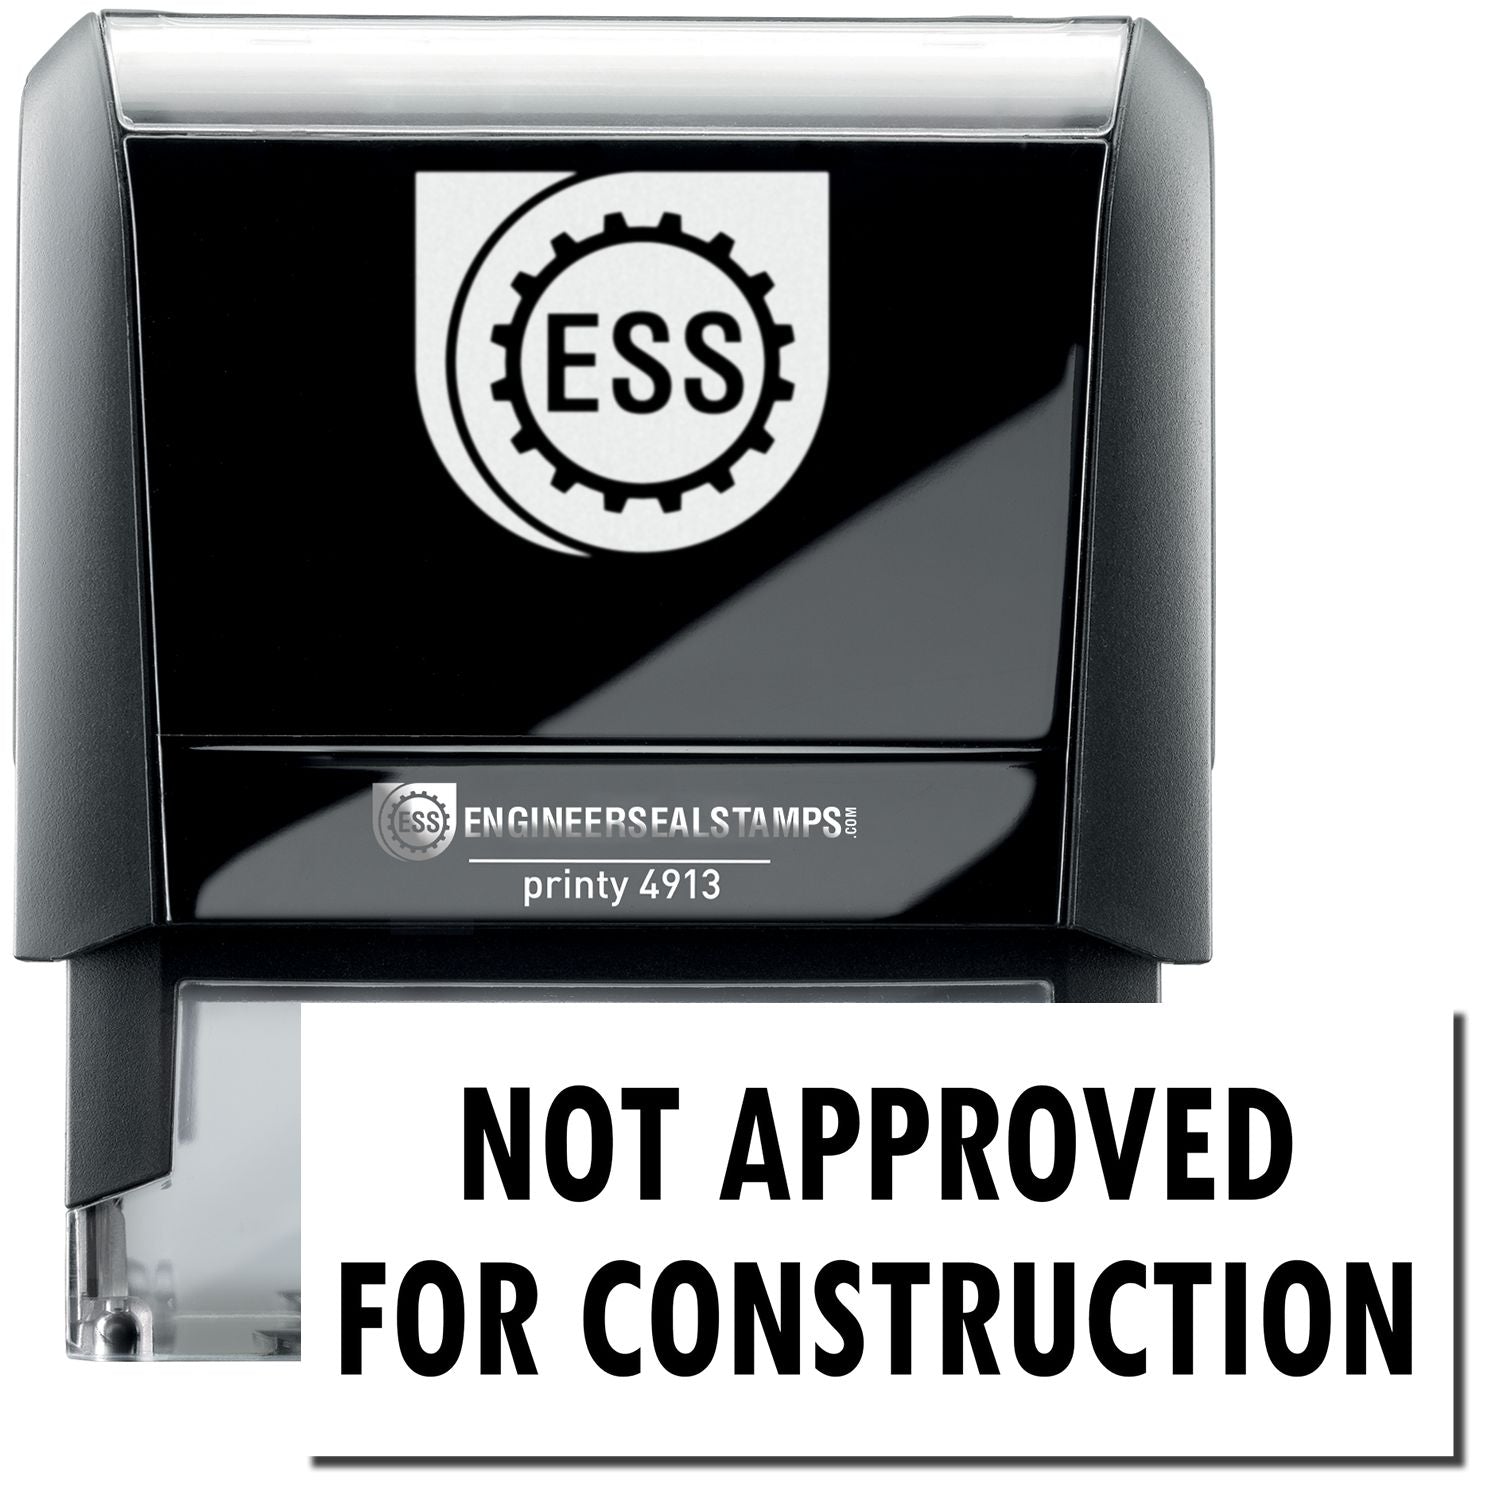 A self-inking stamp with a stamped image showing the text "NOT APPROVED FOR CONSTRUCTION" in a large bold font.